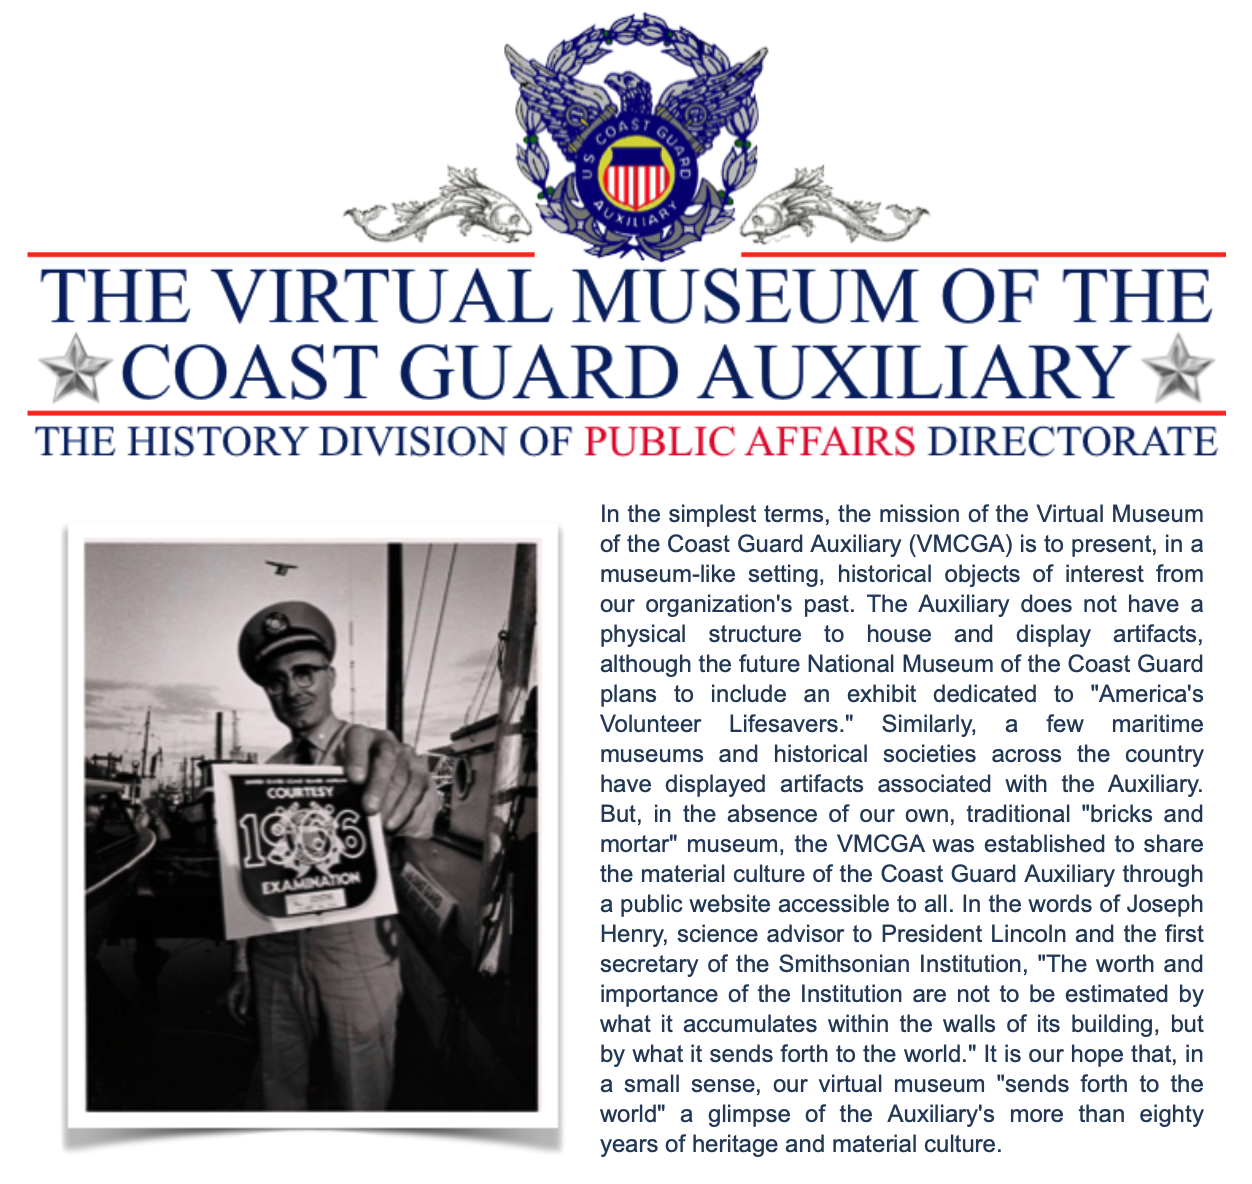 Sample of Virtual Museum of the Coast Guard Auxiliary